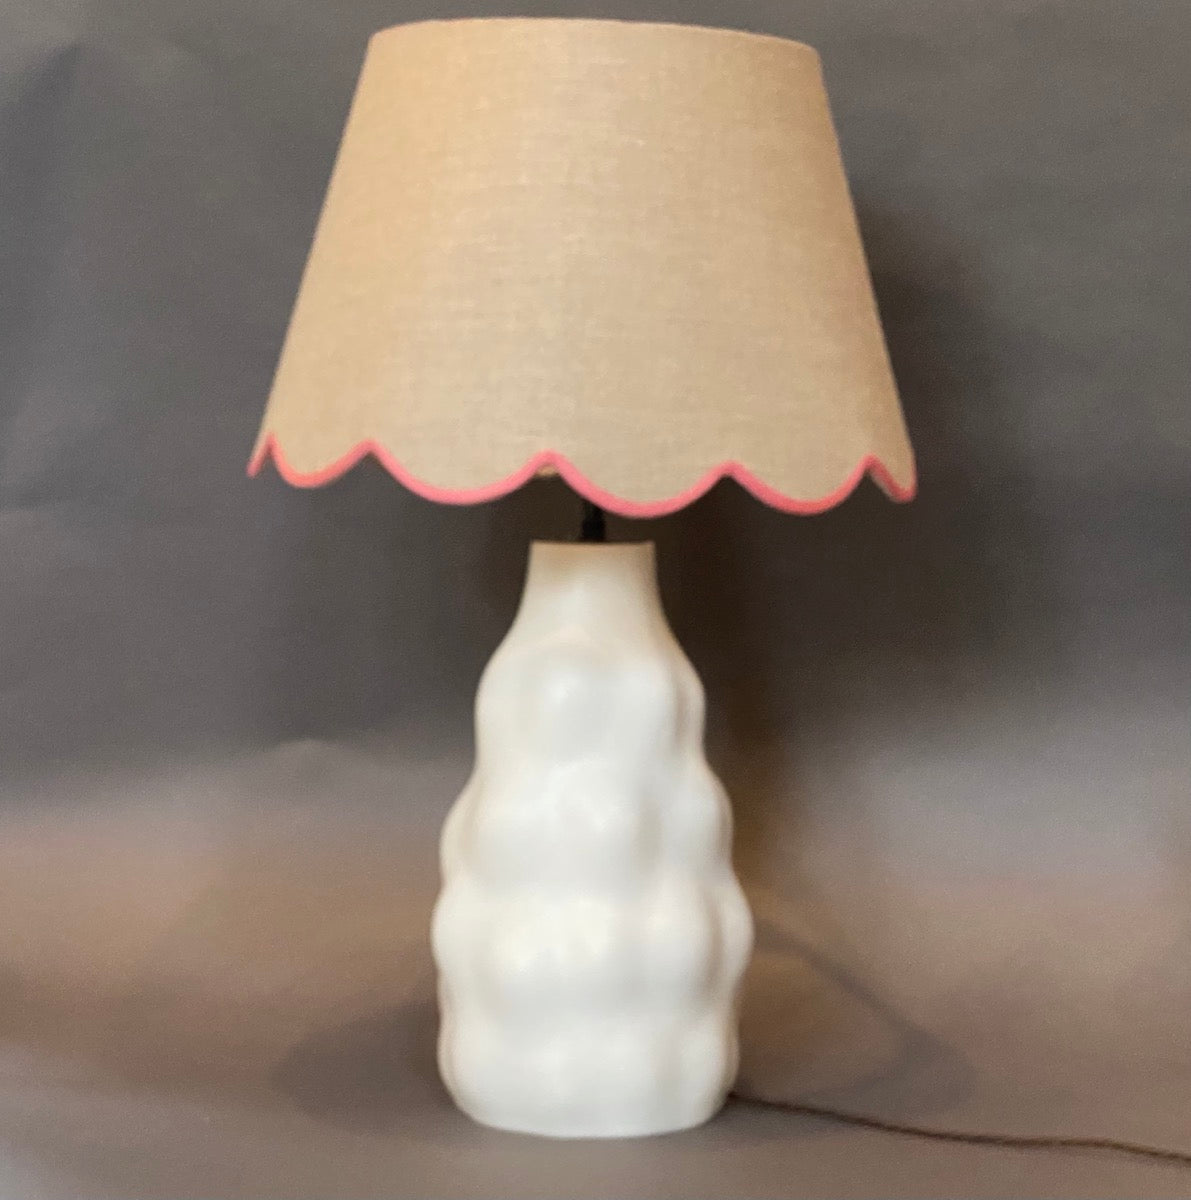 Linen scallop lampshade with pink trim